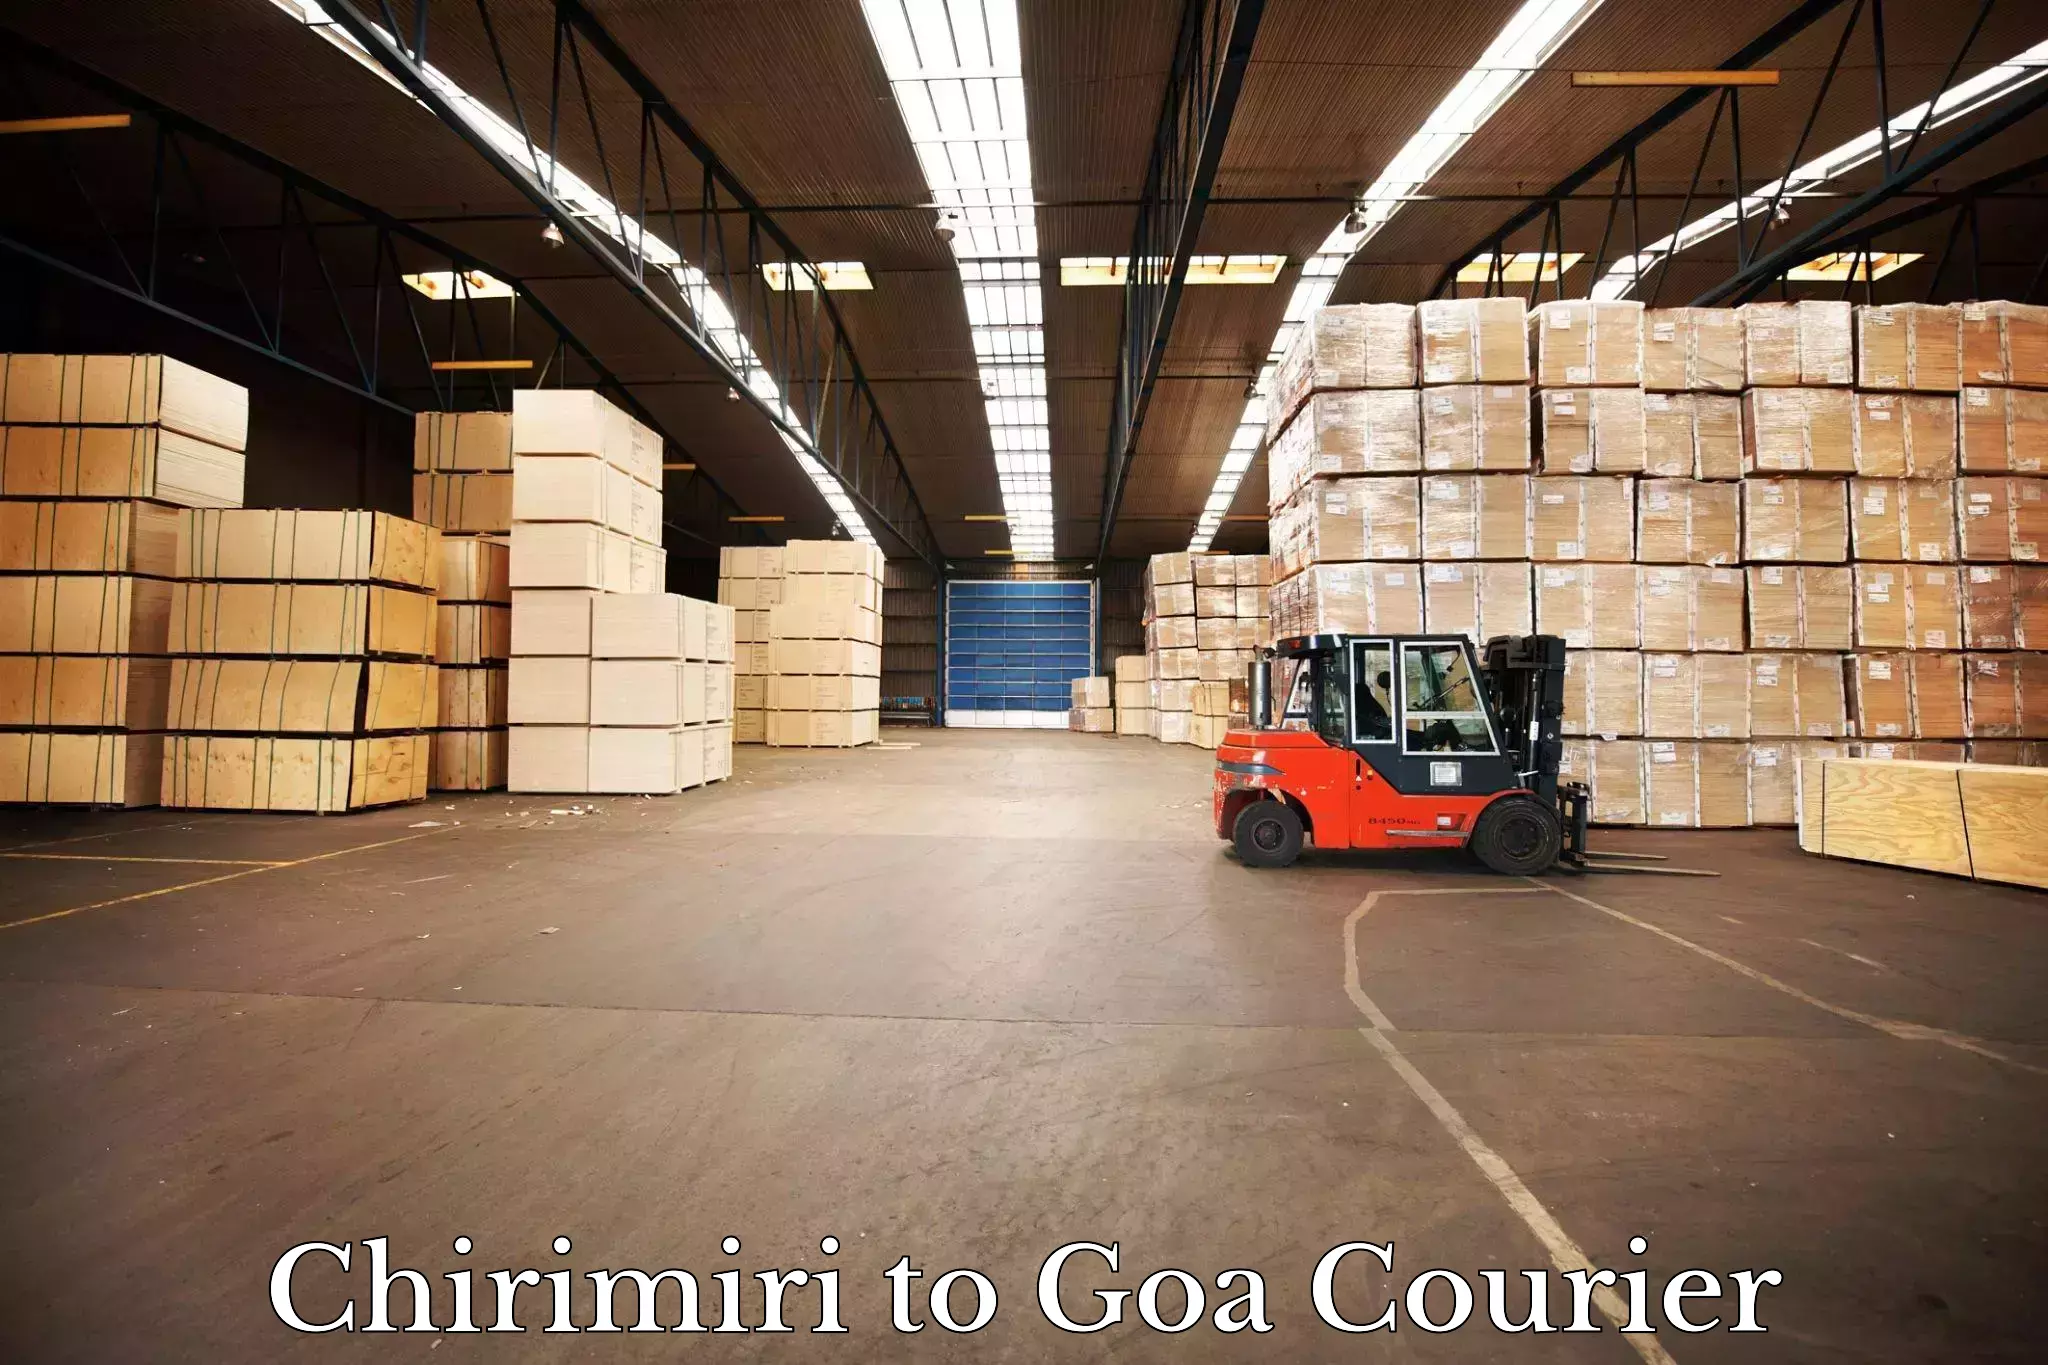 State-of-the-art courier technology Chirimiri to Goa